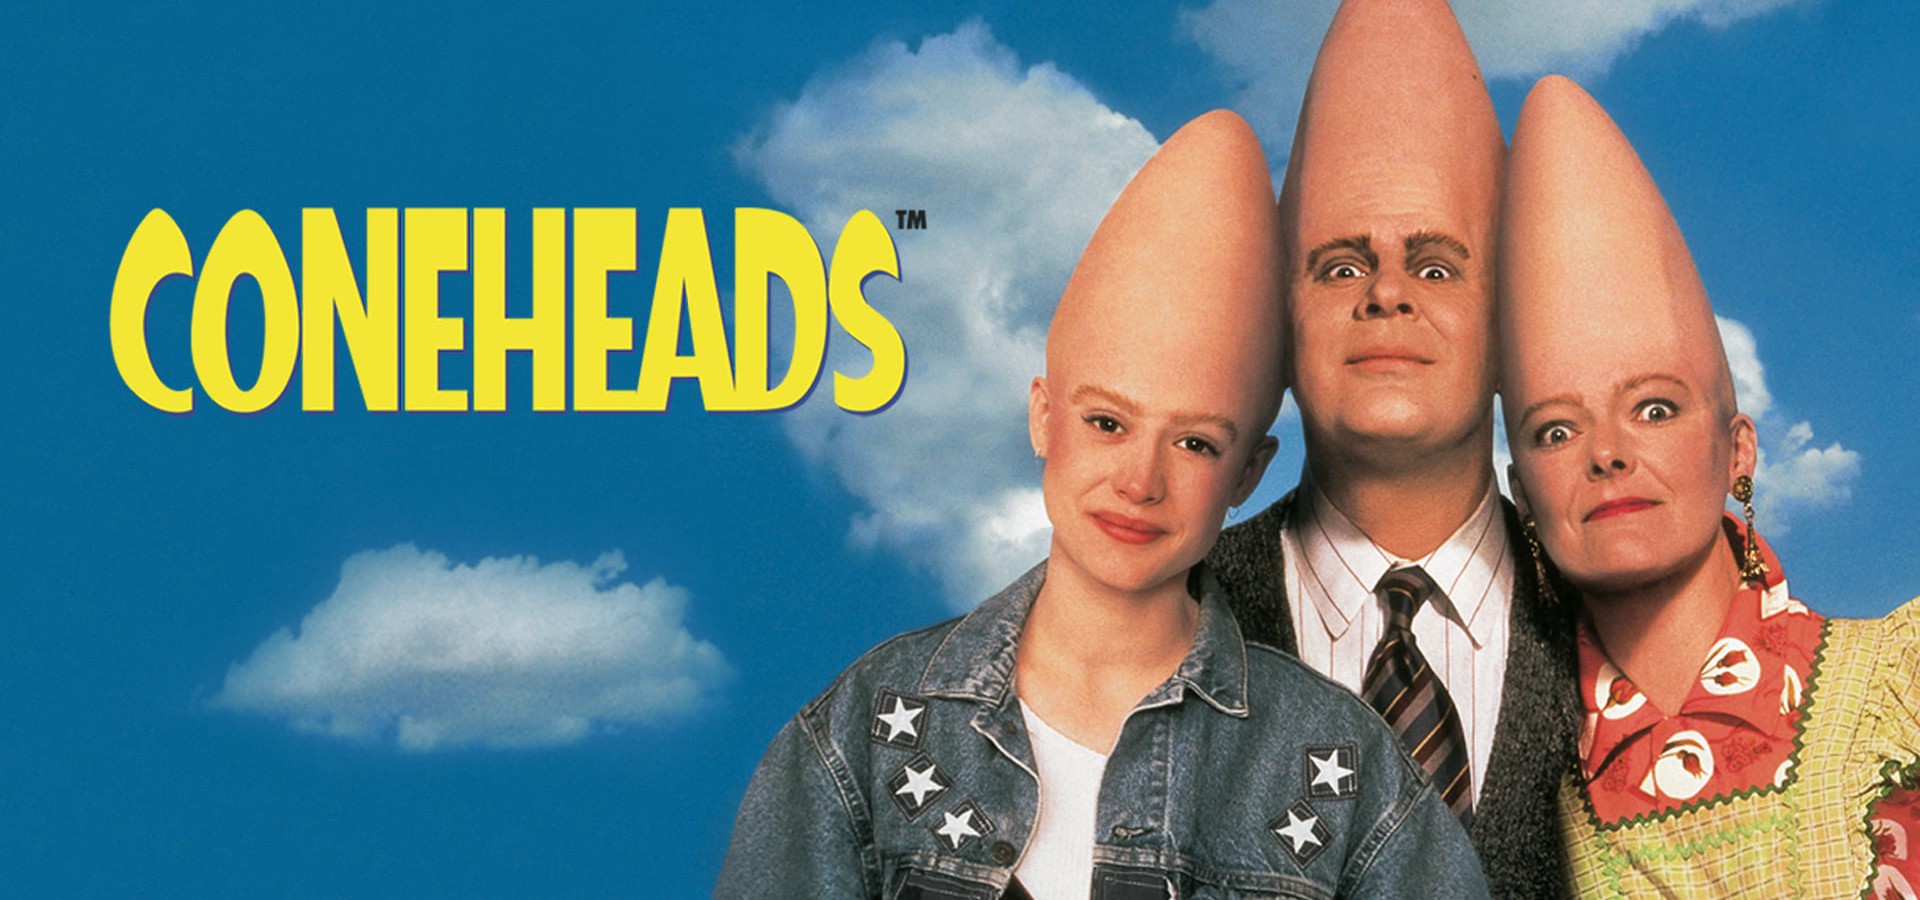 Streaming Coneheads 1993 Full Movies Online